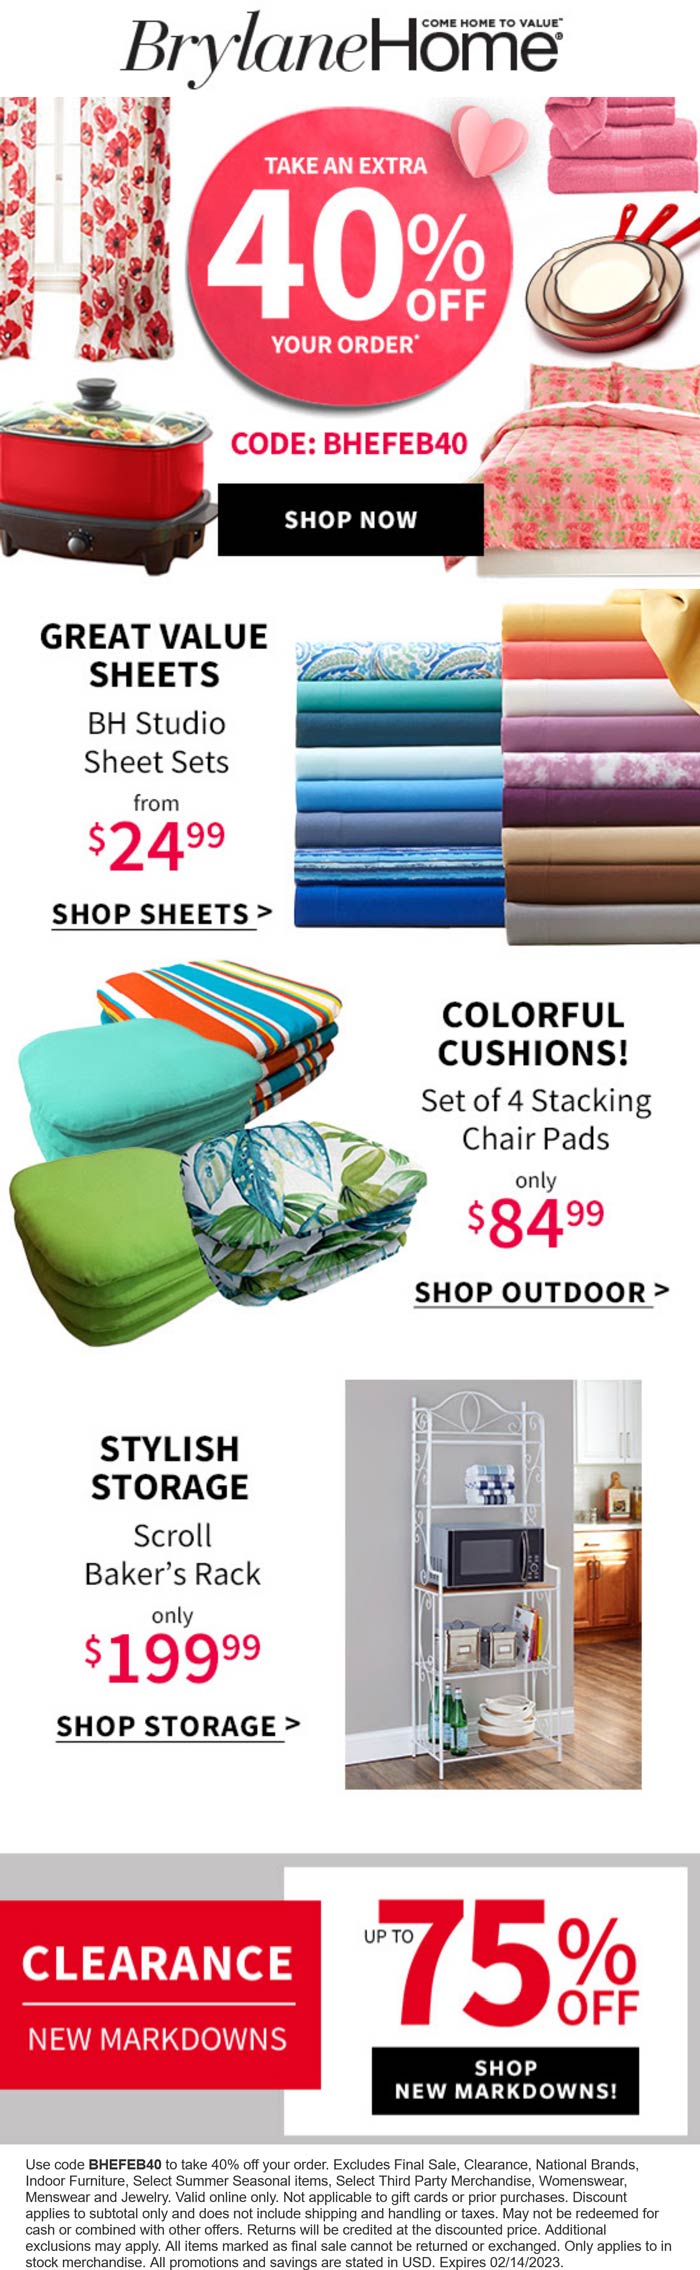 Brylane Home stores Coupon  40% off at Brylane Home via promo code BHEFEB40 #brylanehome 